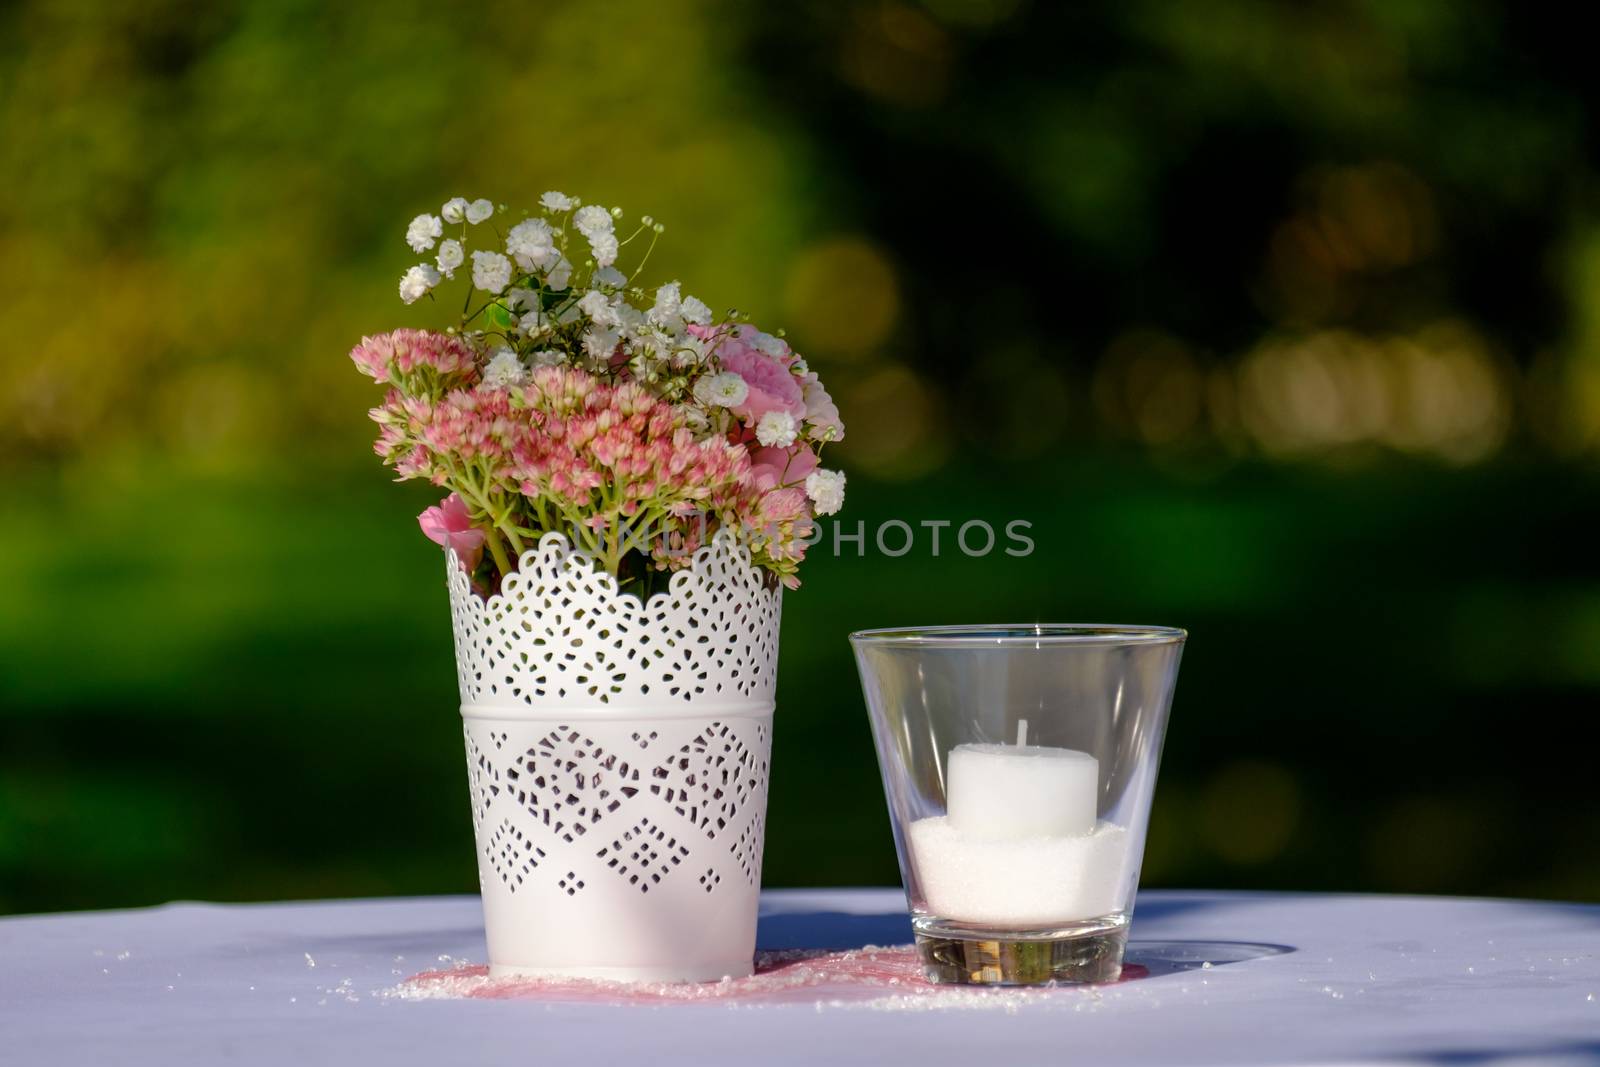 Wedding decoration with flowers and candle on a table